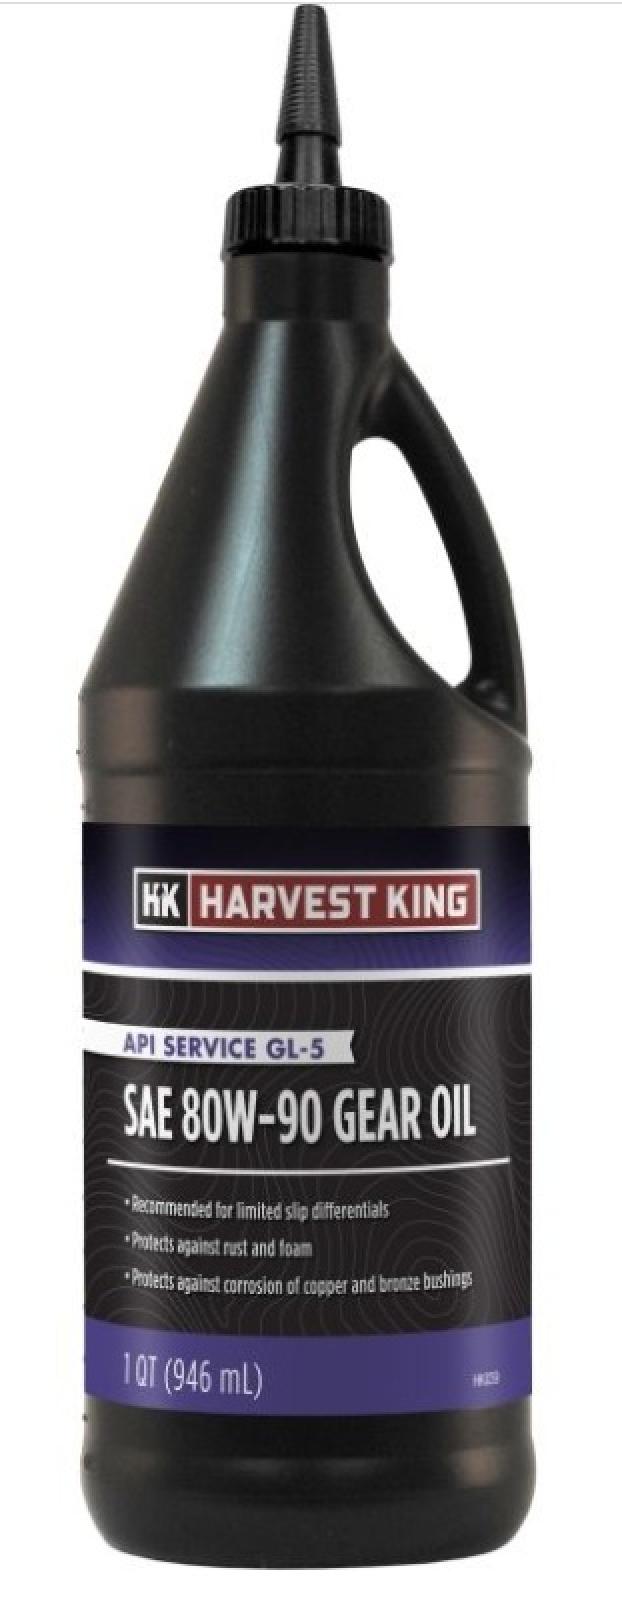 content/products/Harvest King API Service GL-5 SAE 80W-90 Gear Oil